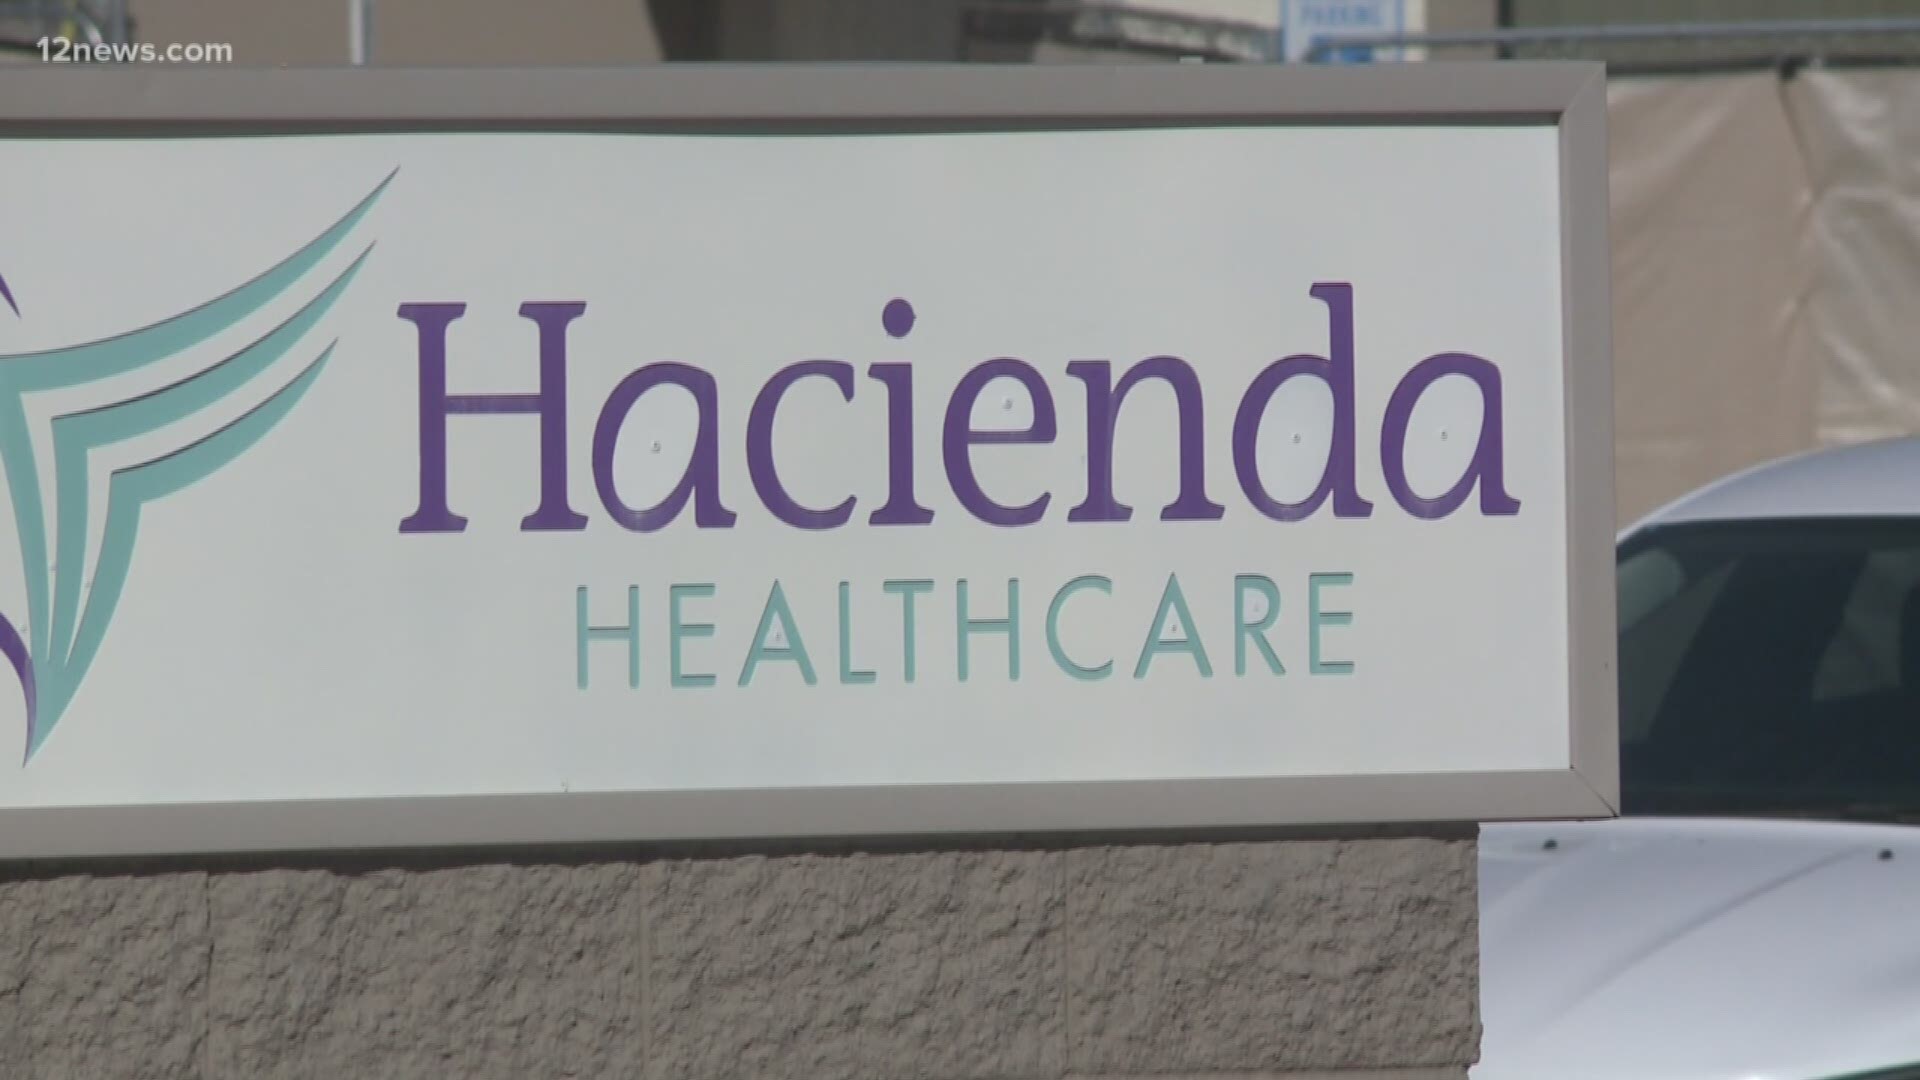 A notice of claim was filed Wednesday against the state of Arizona by the family of an incapacitated woman who gave birth in December at Hacienda Healthcare. Lots of questions still surround the investigation. We answer some of the top questions from viewers.